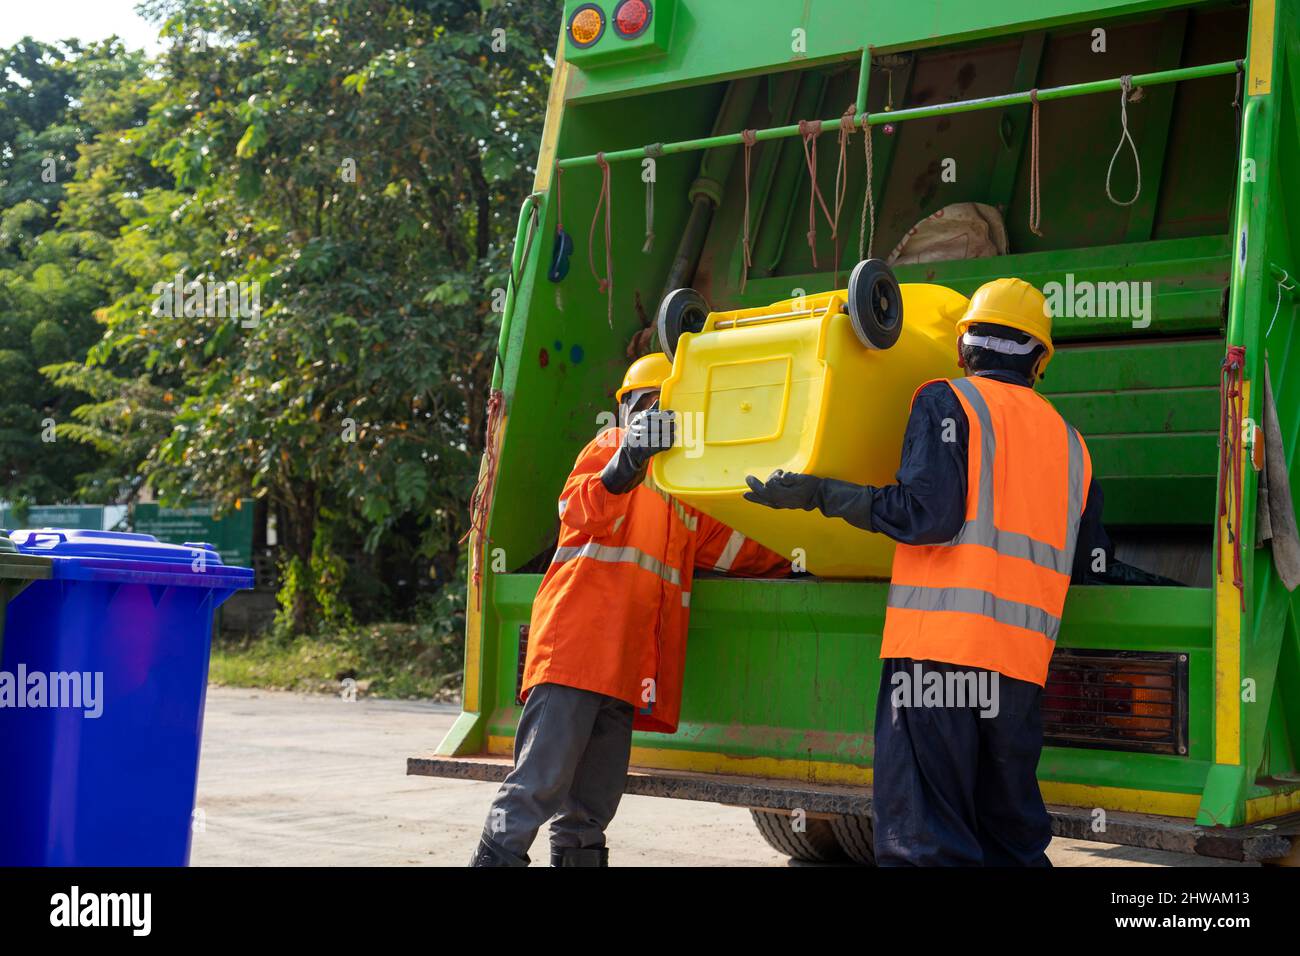 Garbage collector, Two garbage men working together on emptying dustbins for trash removal with truck loading waste and trash bin. Stock Photo